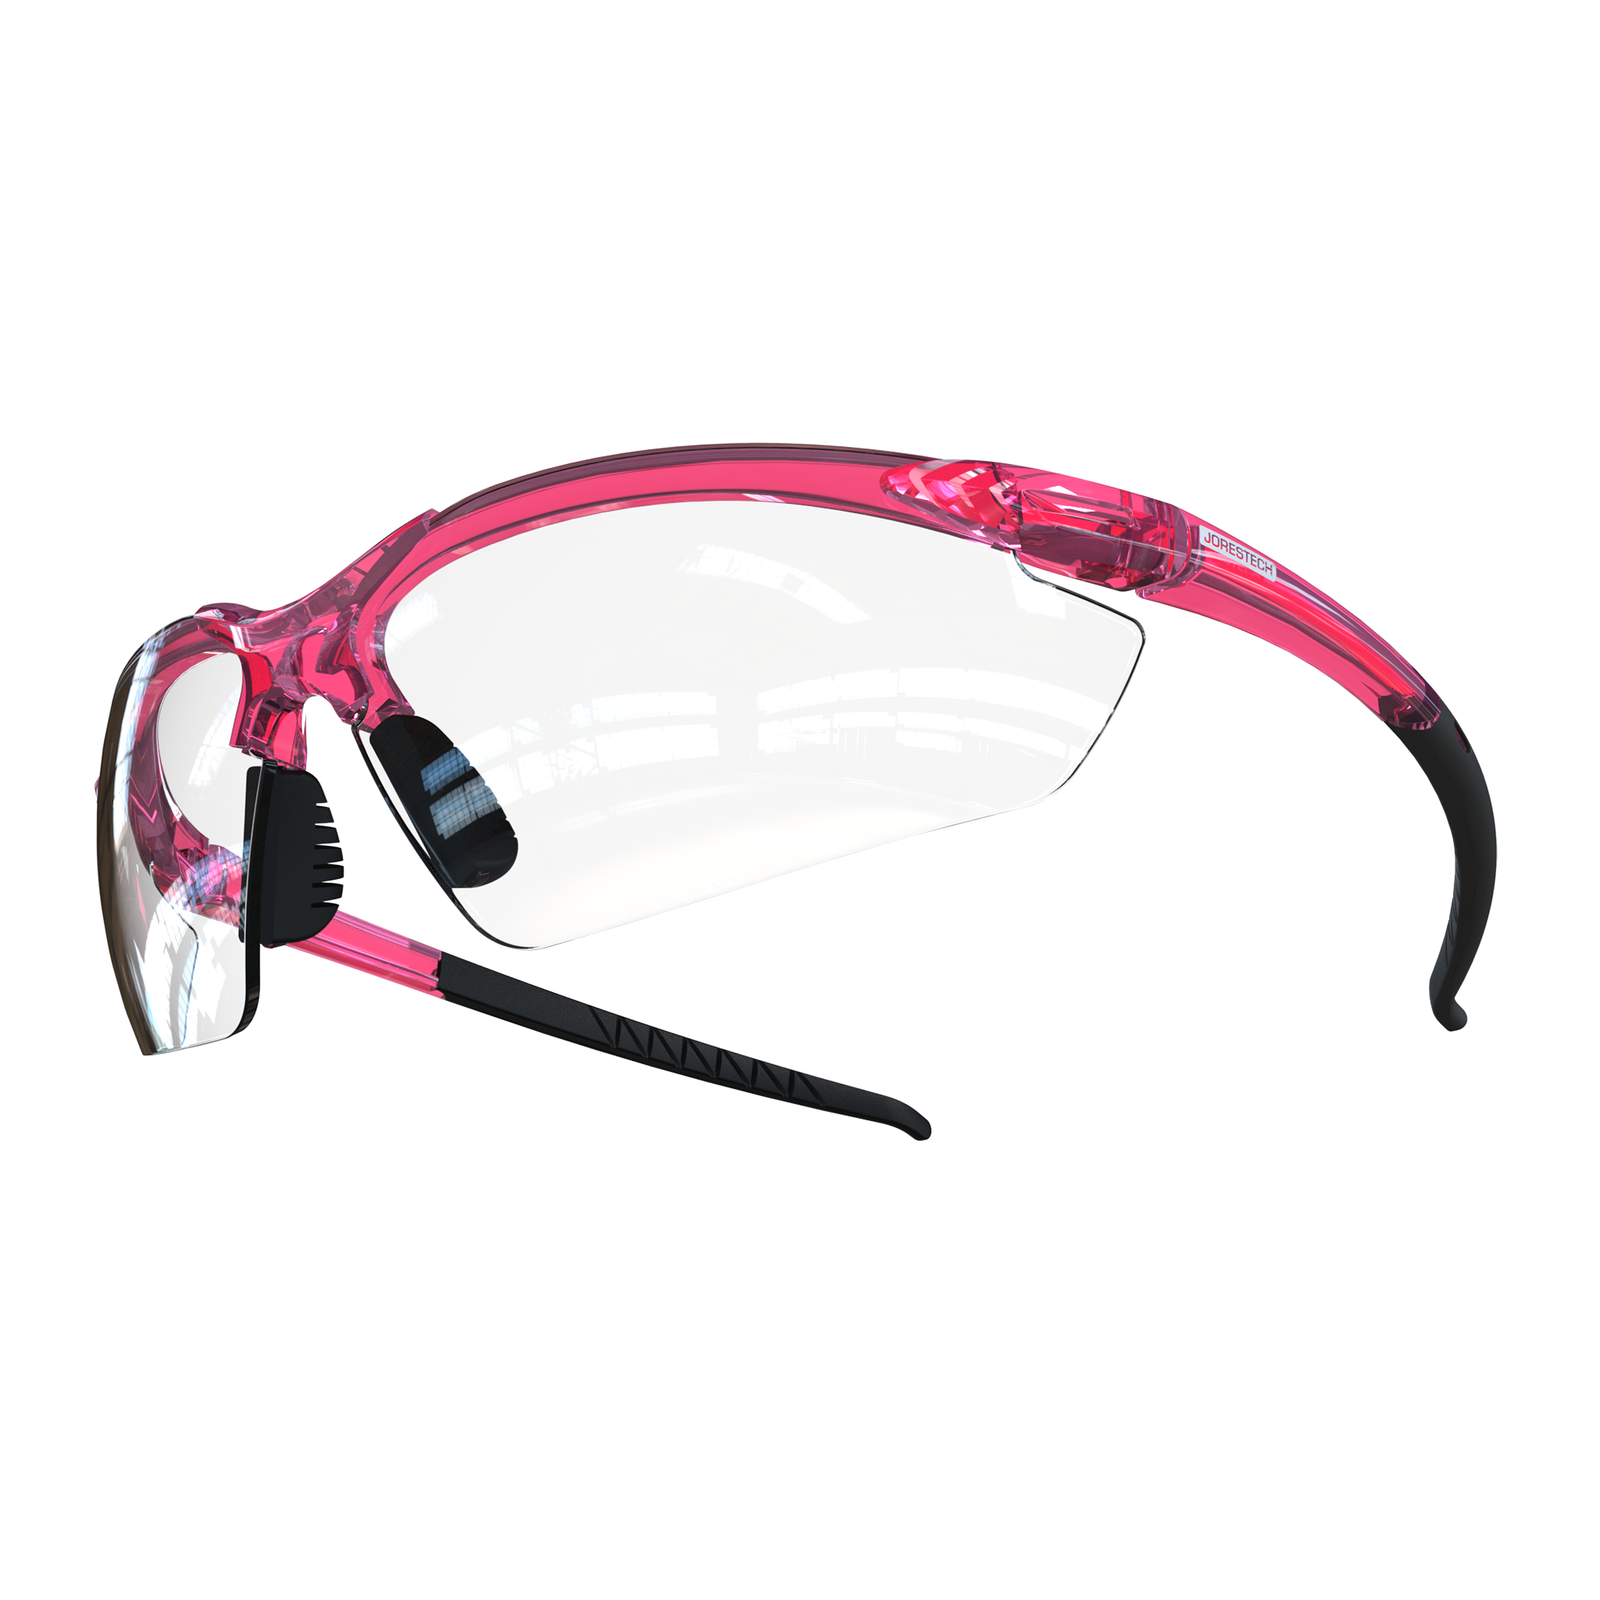 The ANSI Z87 + Compliant high impact safety glasses with flexible rubber temple with clear lenses and pink frame and temples